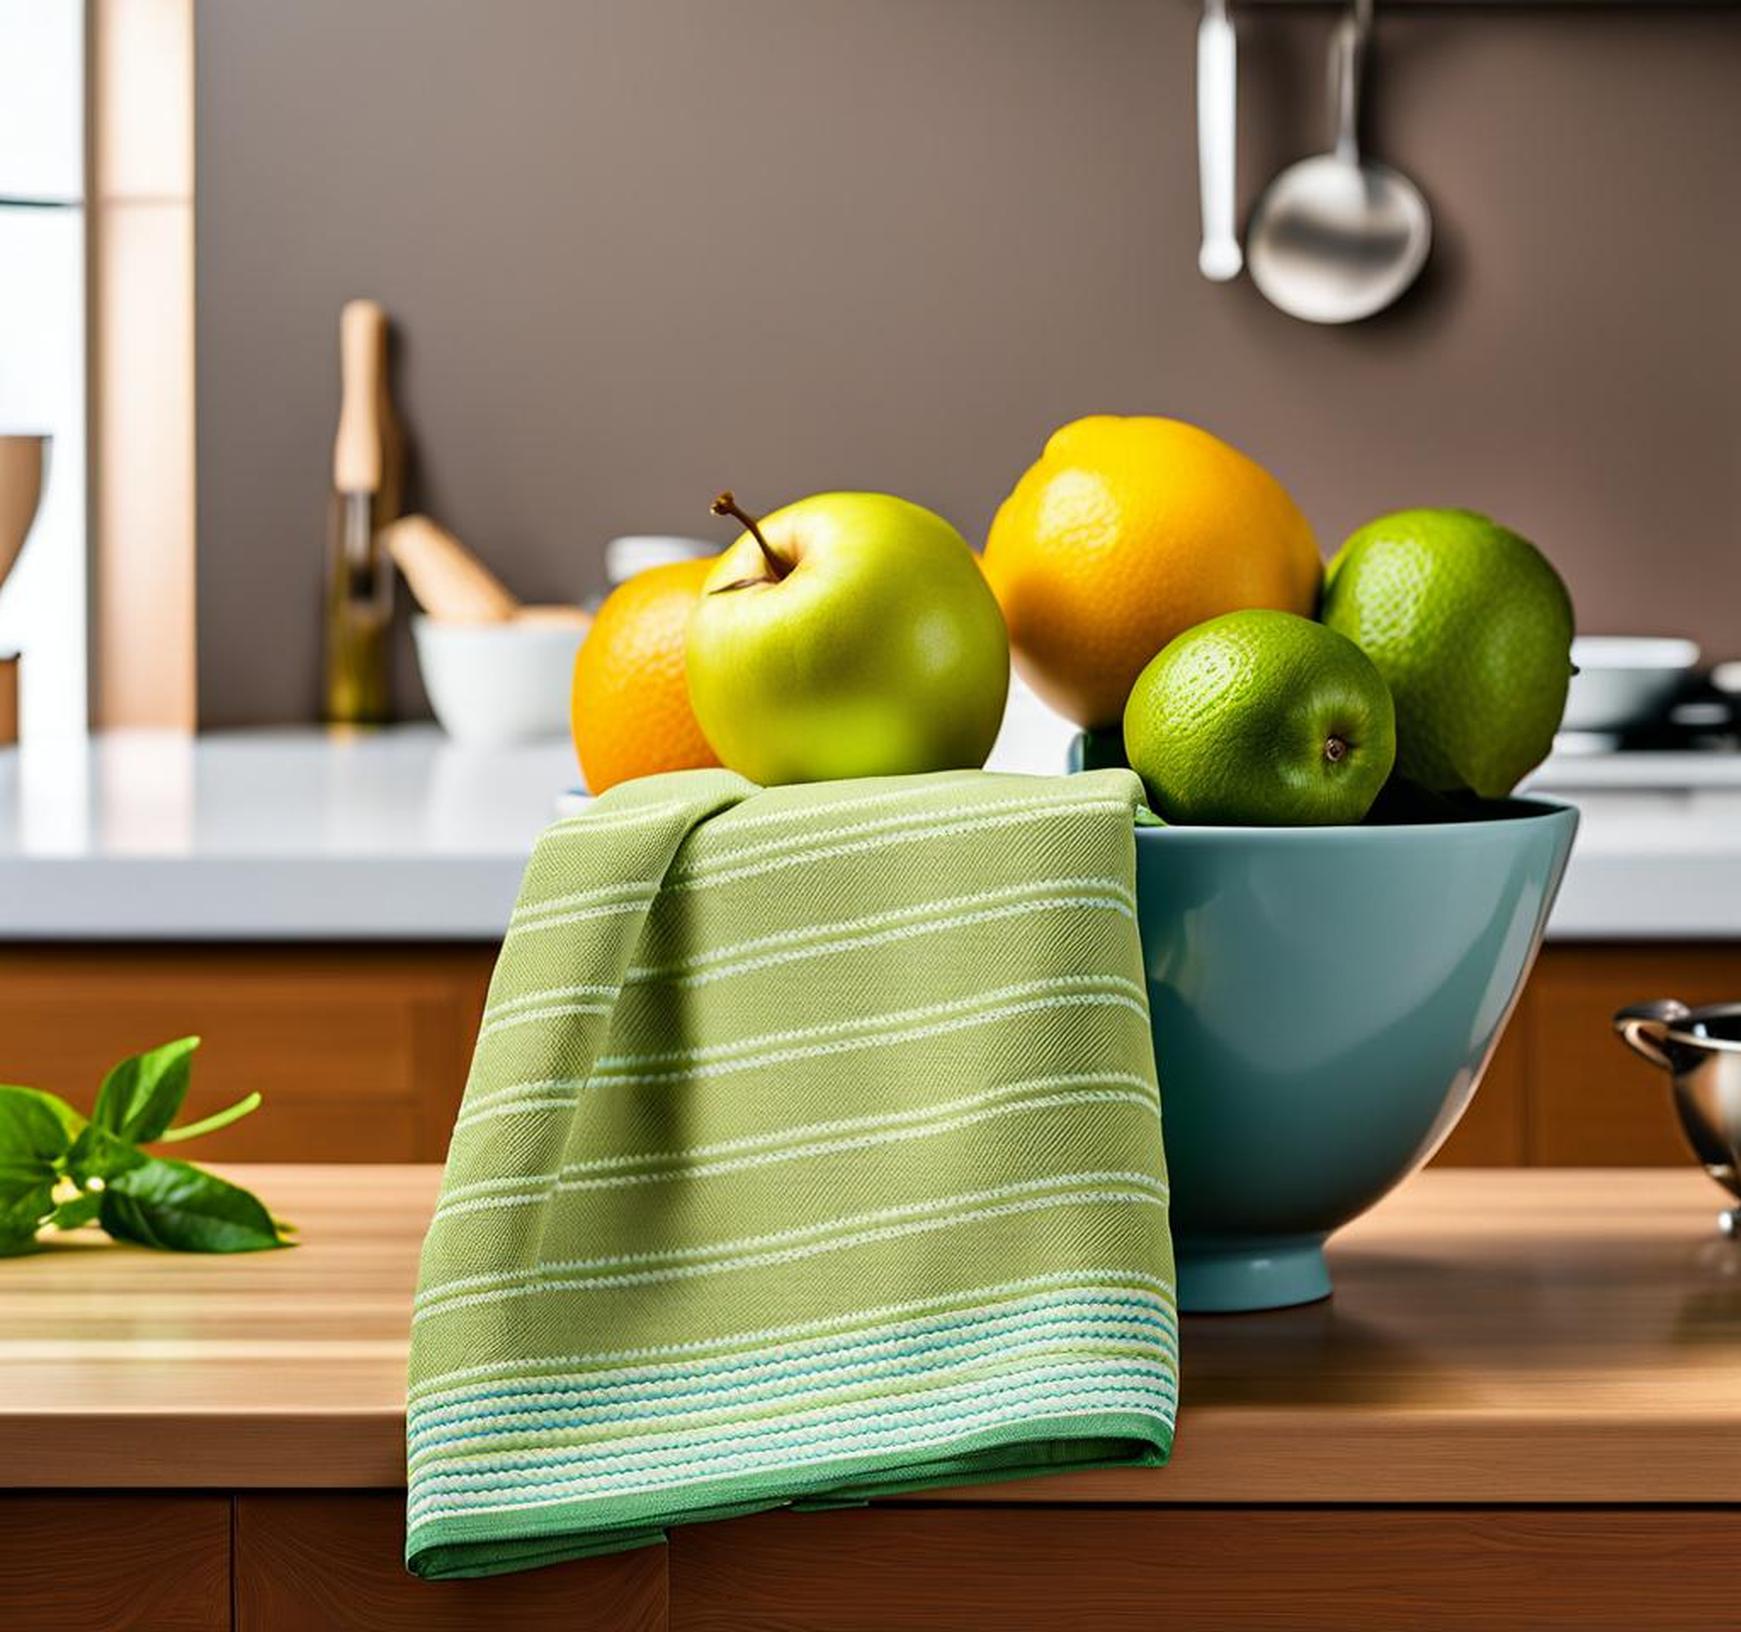 what's the difference between a tea towel and a kitchen towel